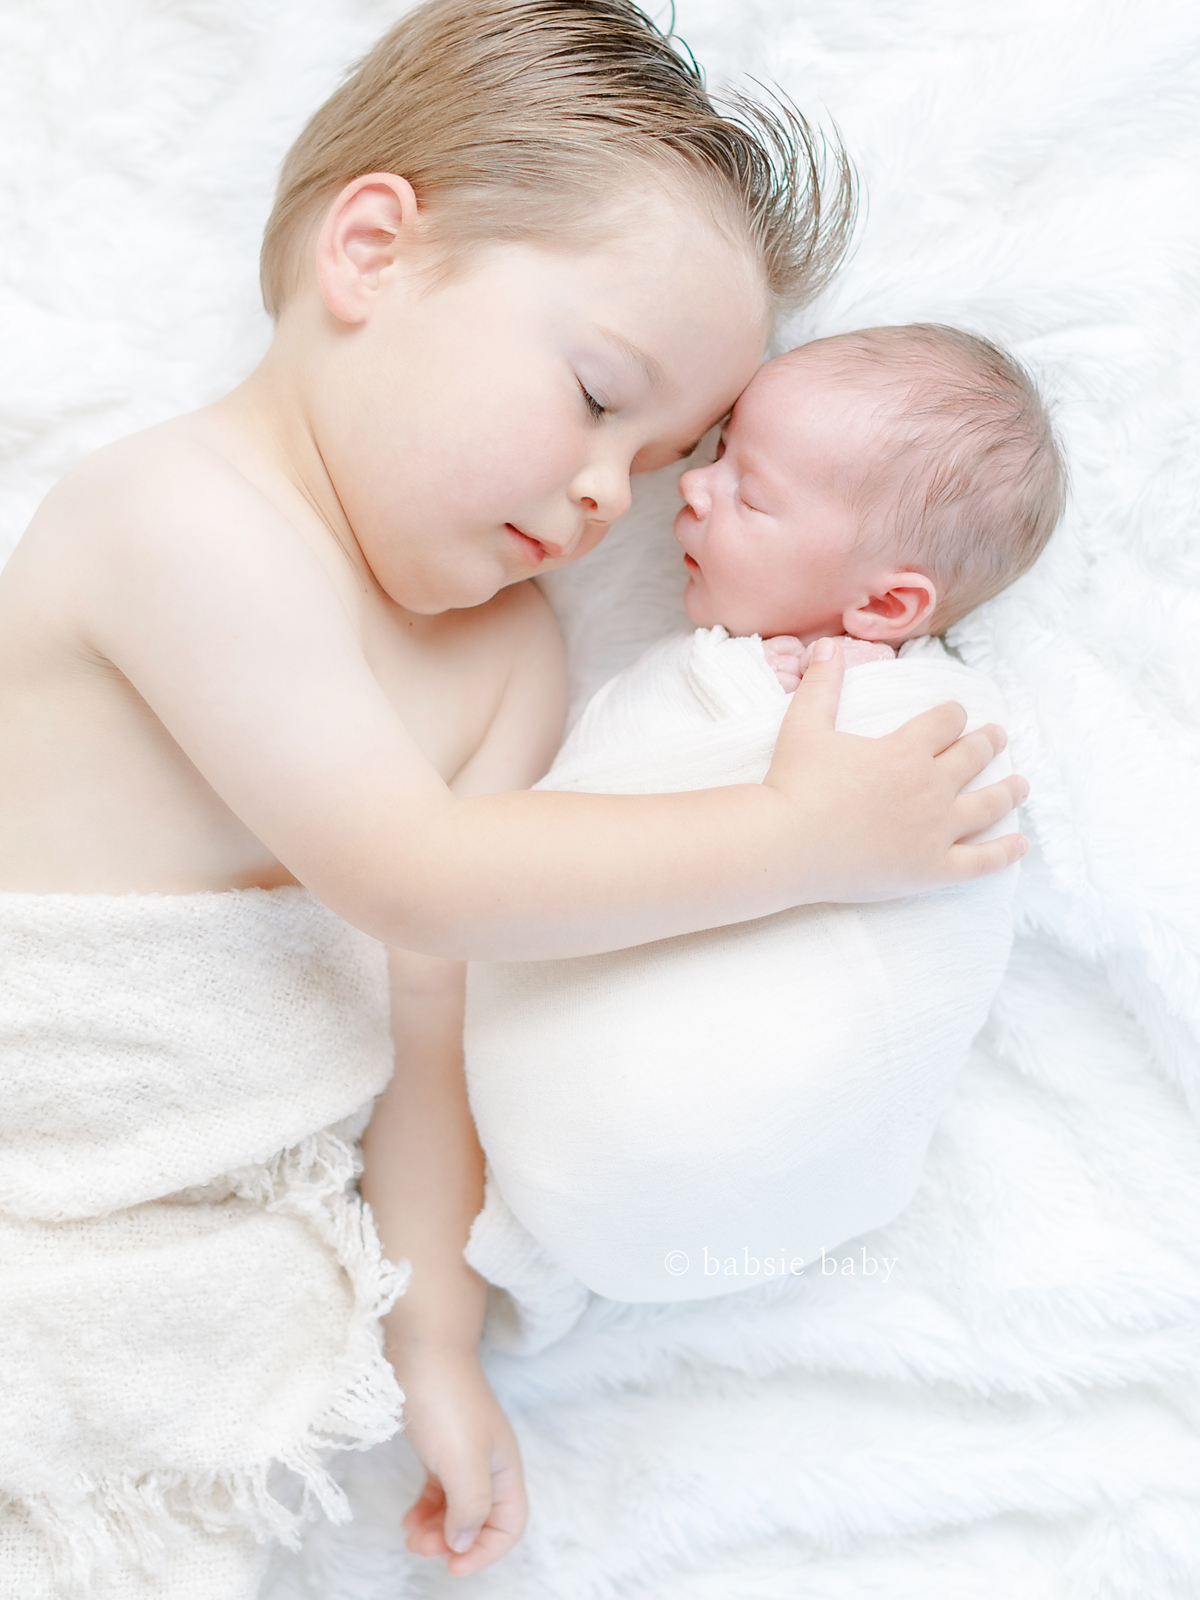 Sibling photo of big brother and baby sister at her newborn session.